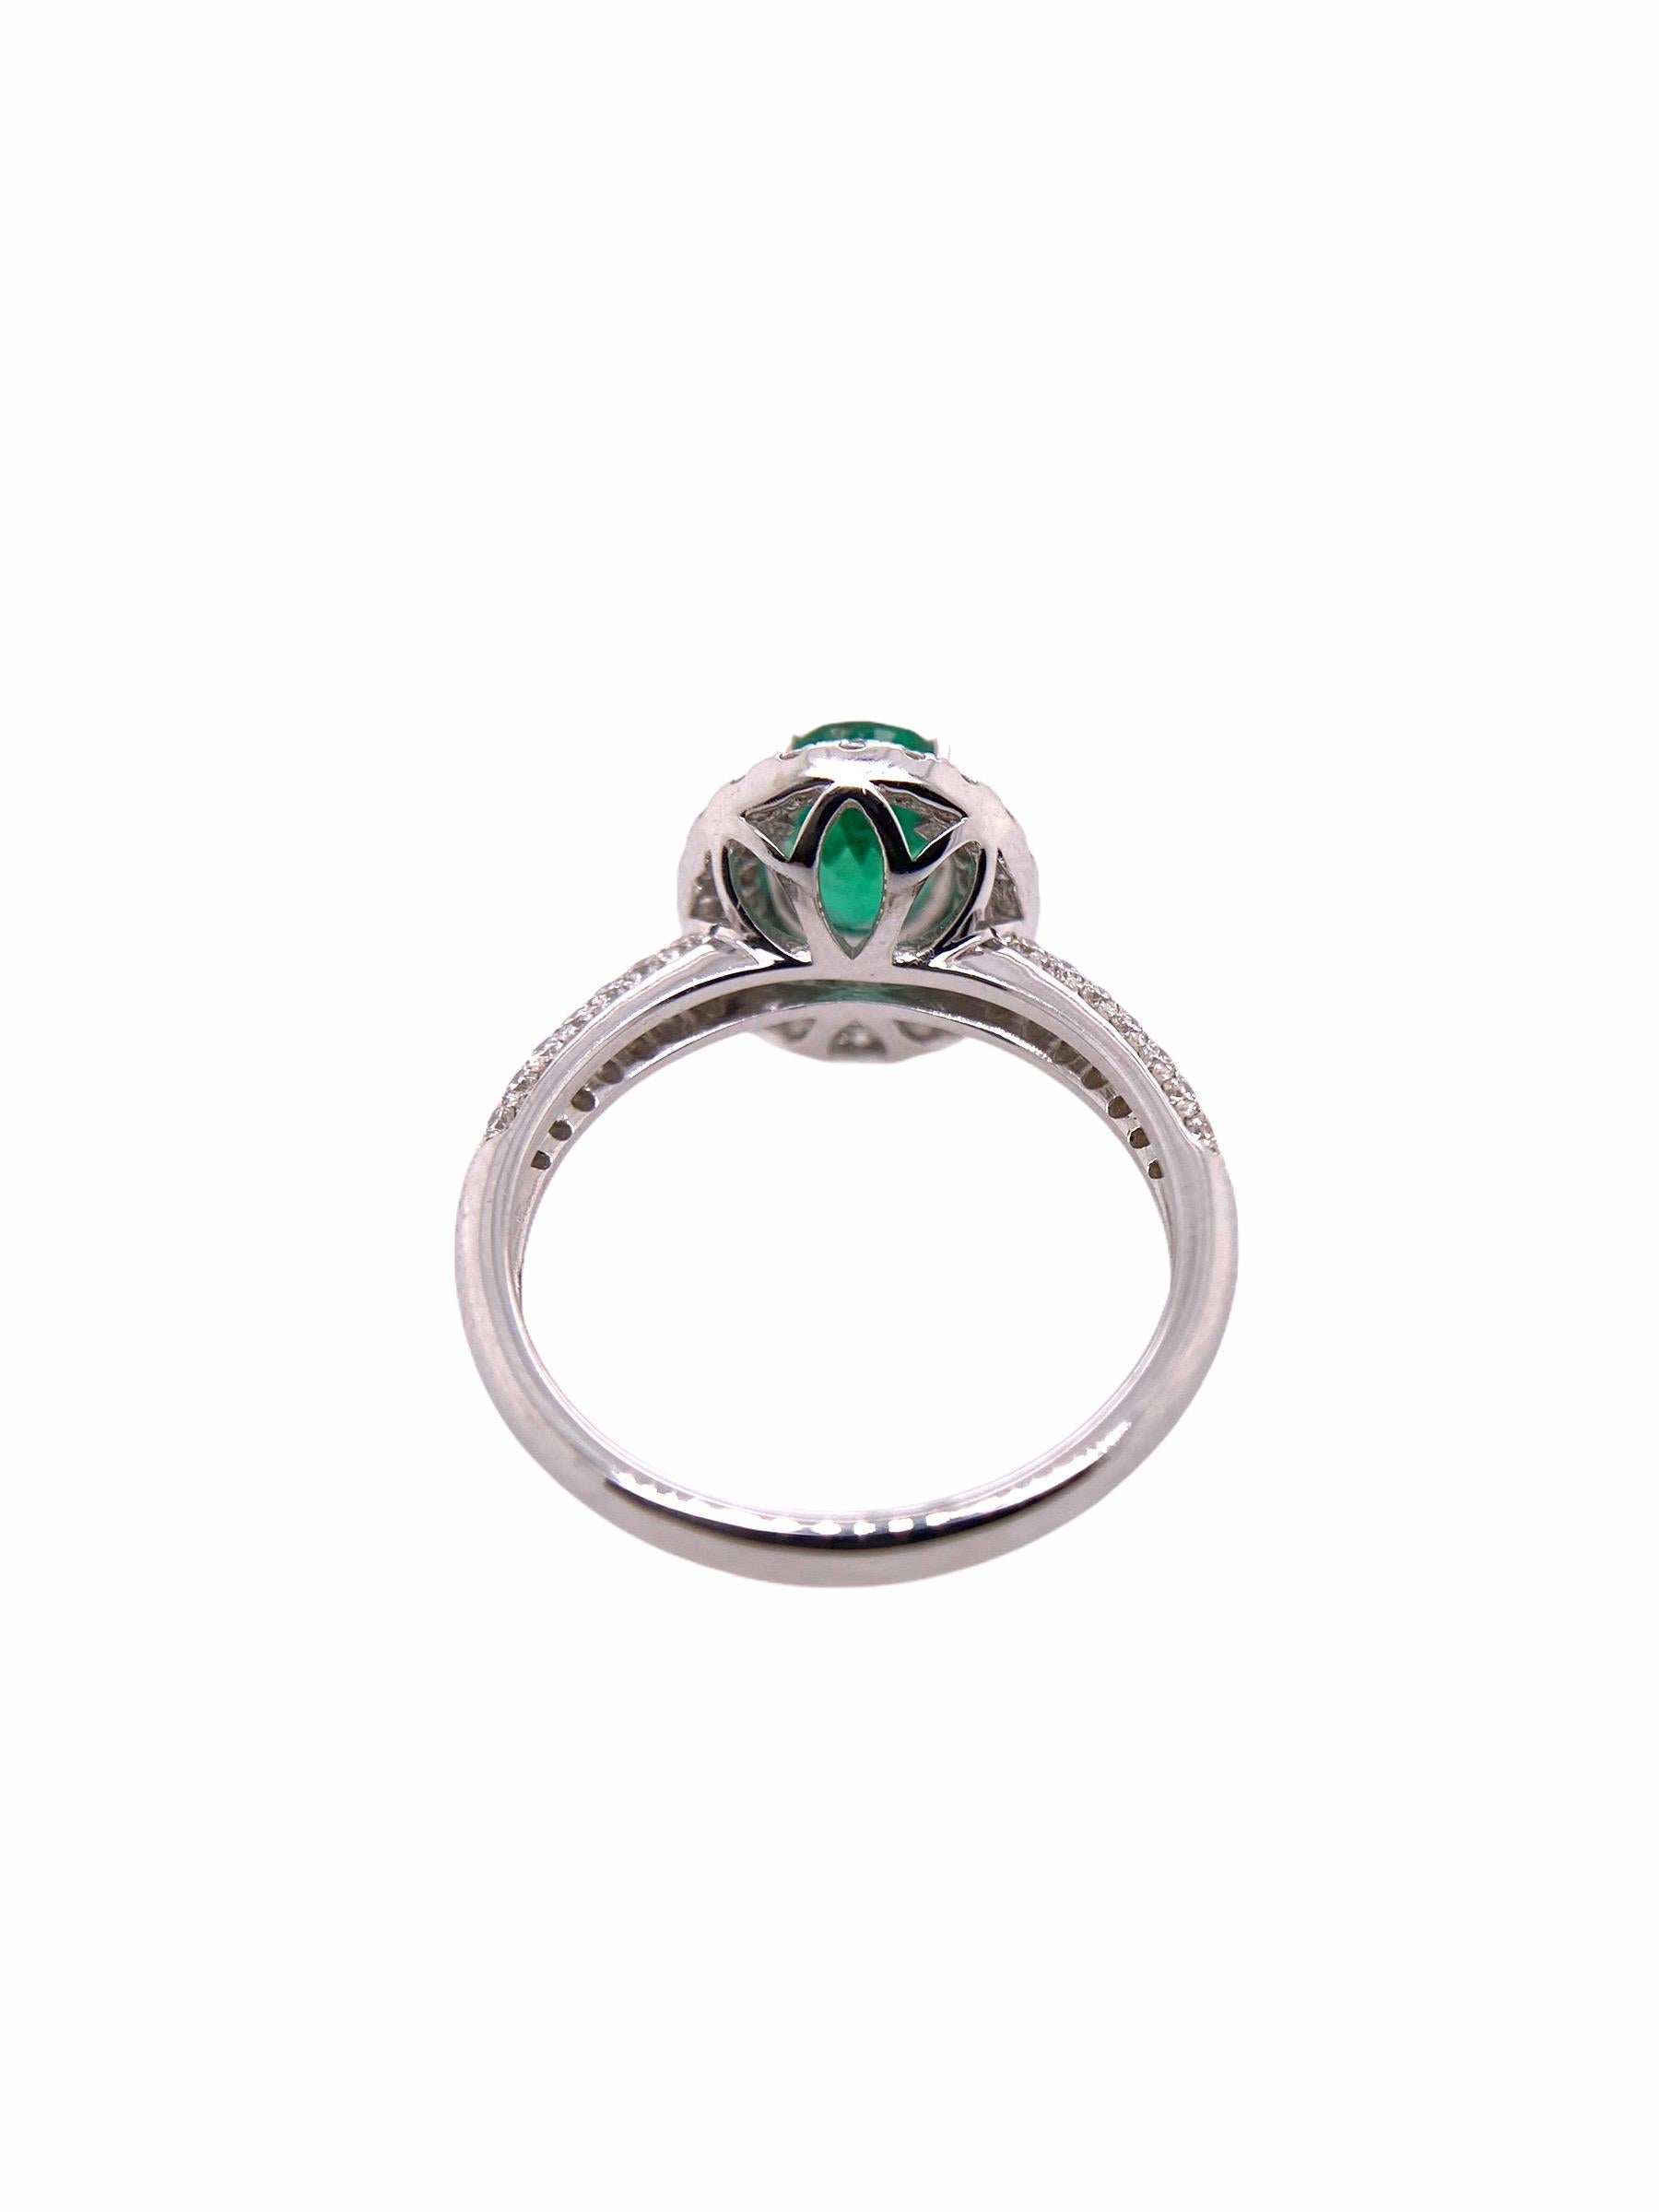 Paris Craft House 1.10 Carat Oval Emerald Diamond Halo Ring in 18 Karat Gold In New Condition For Sale In Hong Kong, HK